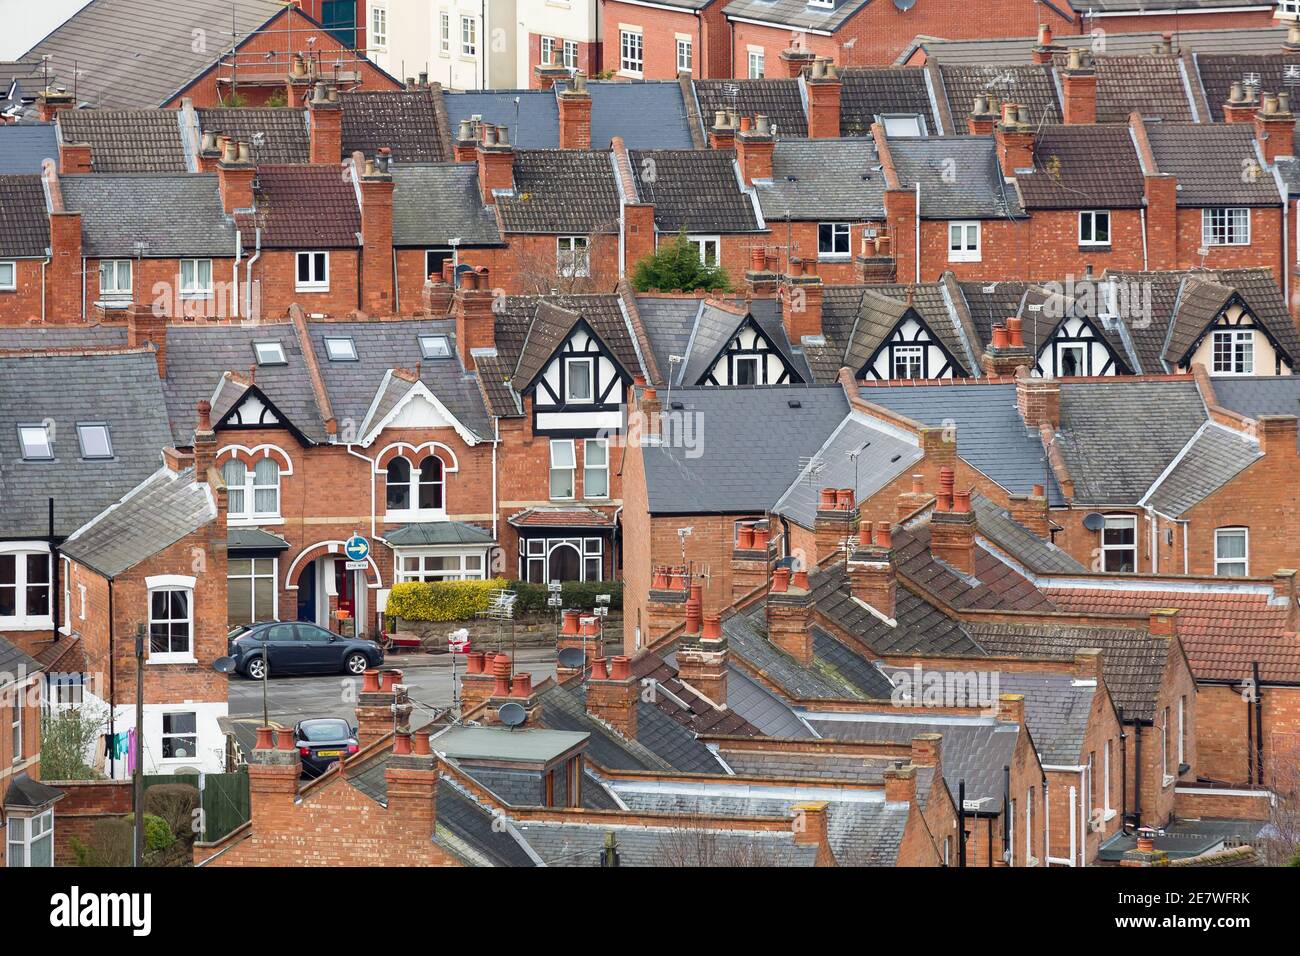 Rows of old suburban terraced houses in an English town. Warwick, UK Stock Photo